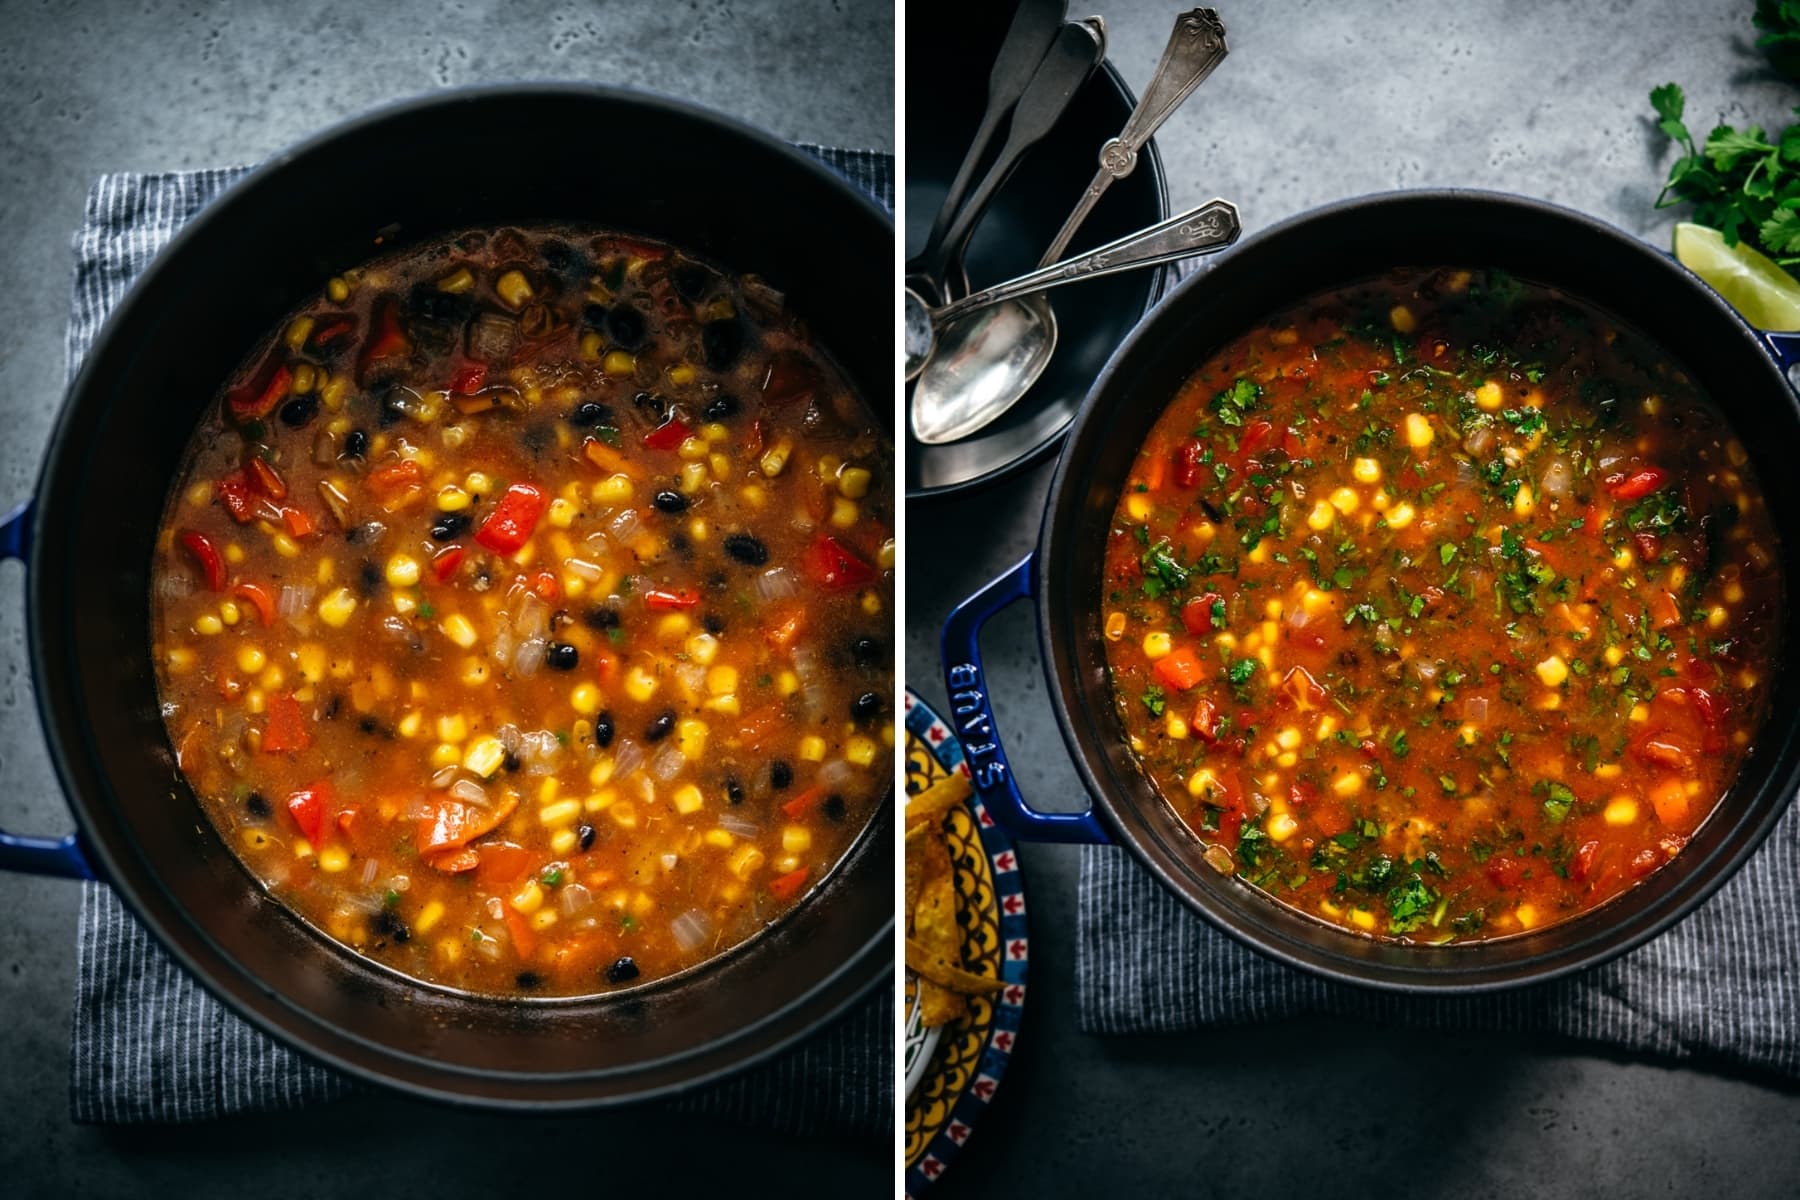 before and after vegan tortilla soup has been cooked in large pot.